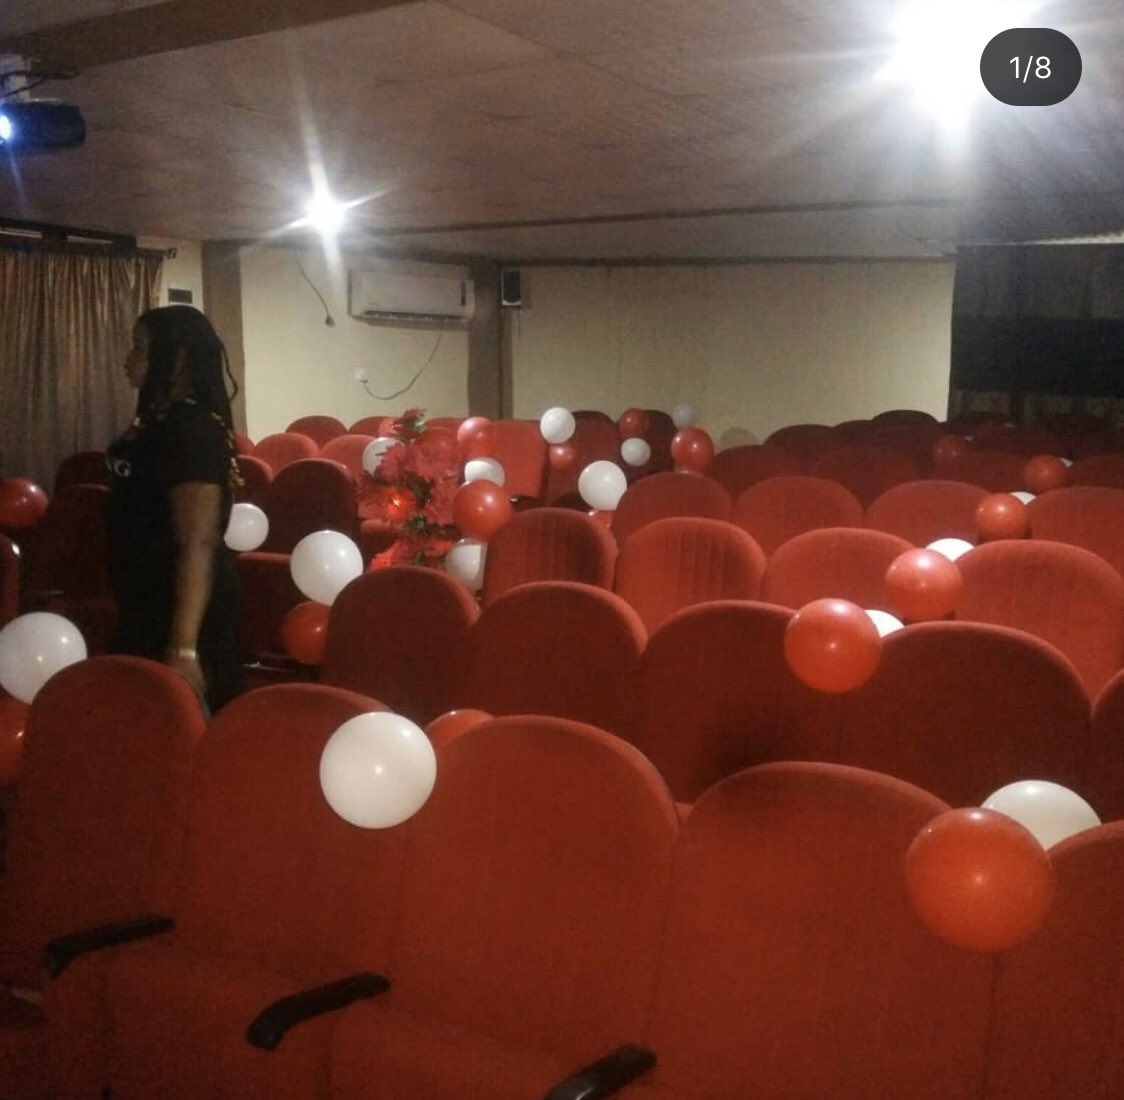 A lot of you probably didn’t know Kaduna has a cinema, it’s called ESPIONAGE CINEMA located at ASD SHOPPING MALL, third or fourth floor. It’s quite affordable, last time I was there RECENT movie tickets sold for #1500 while old movies sold for #1000